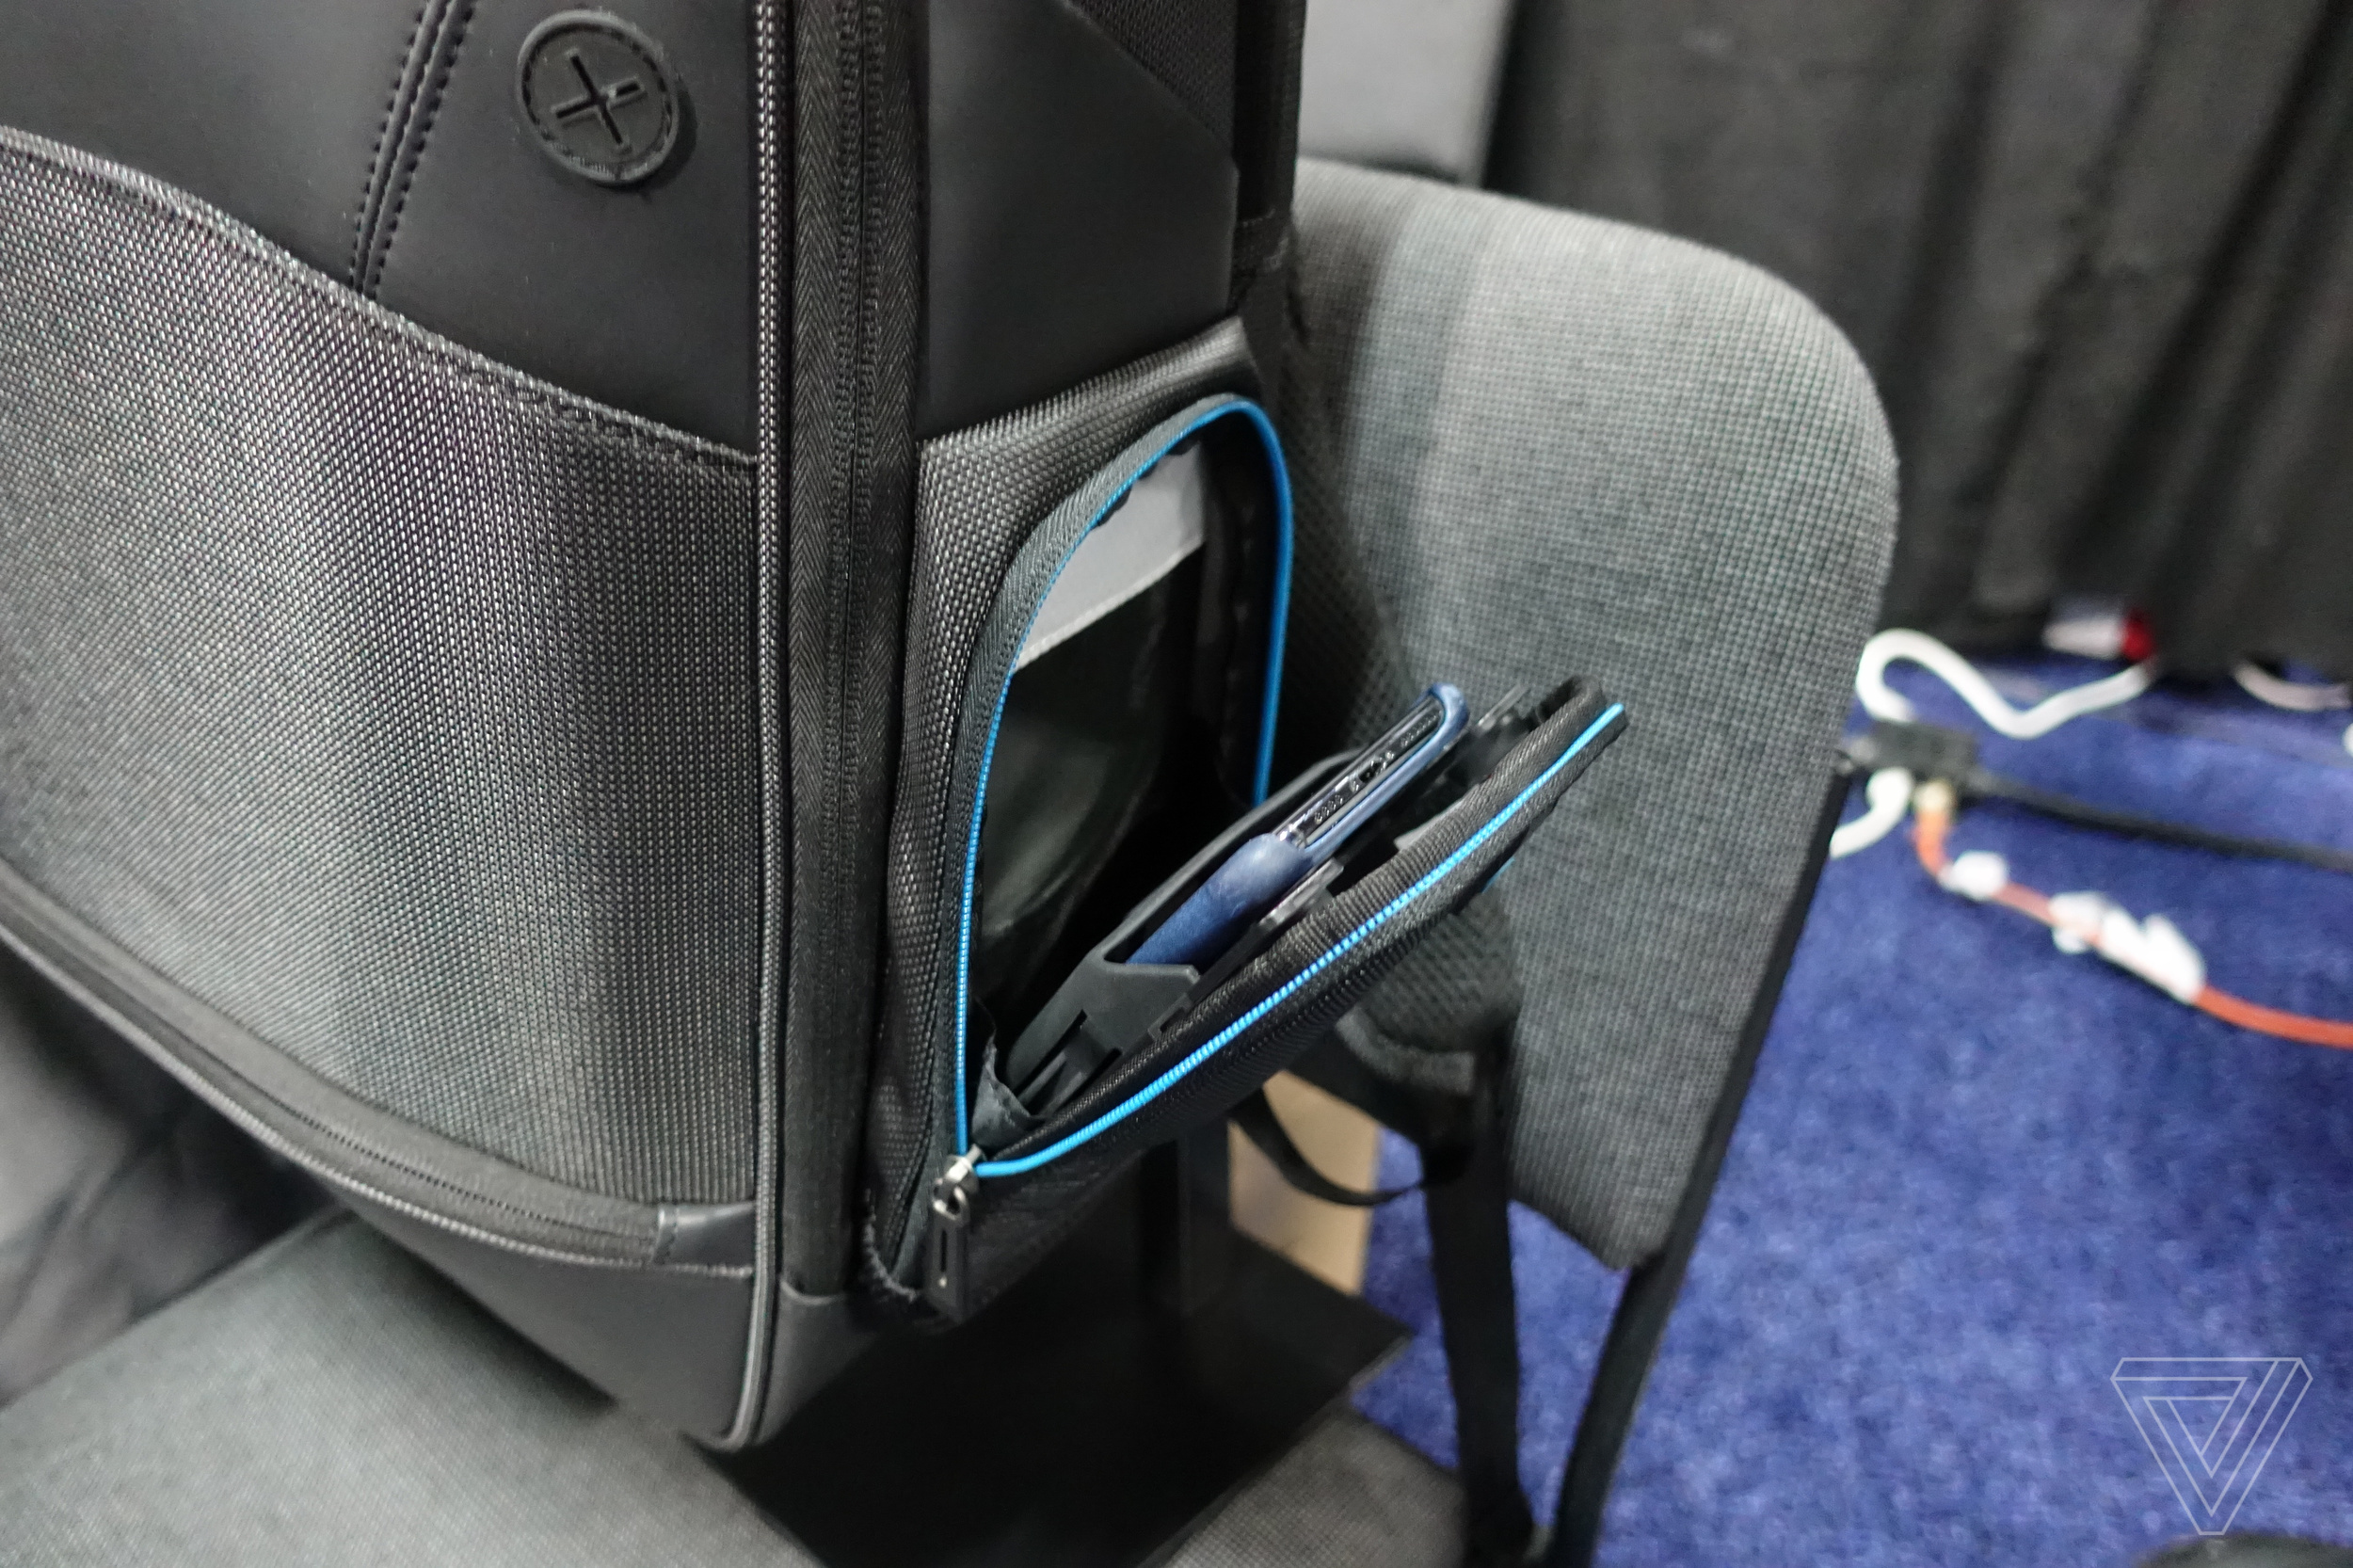 Targus backpack with wireless charging pocket